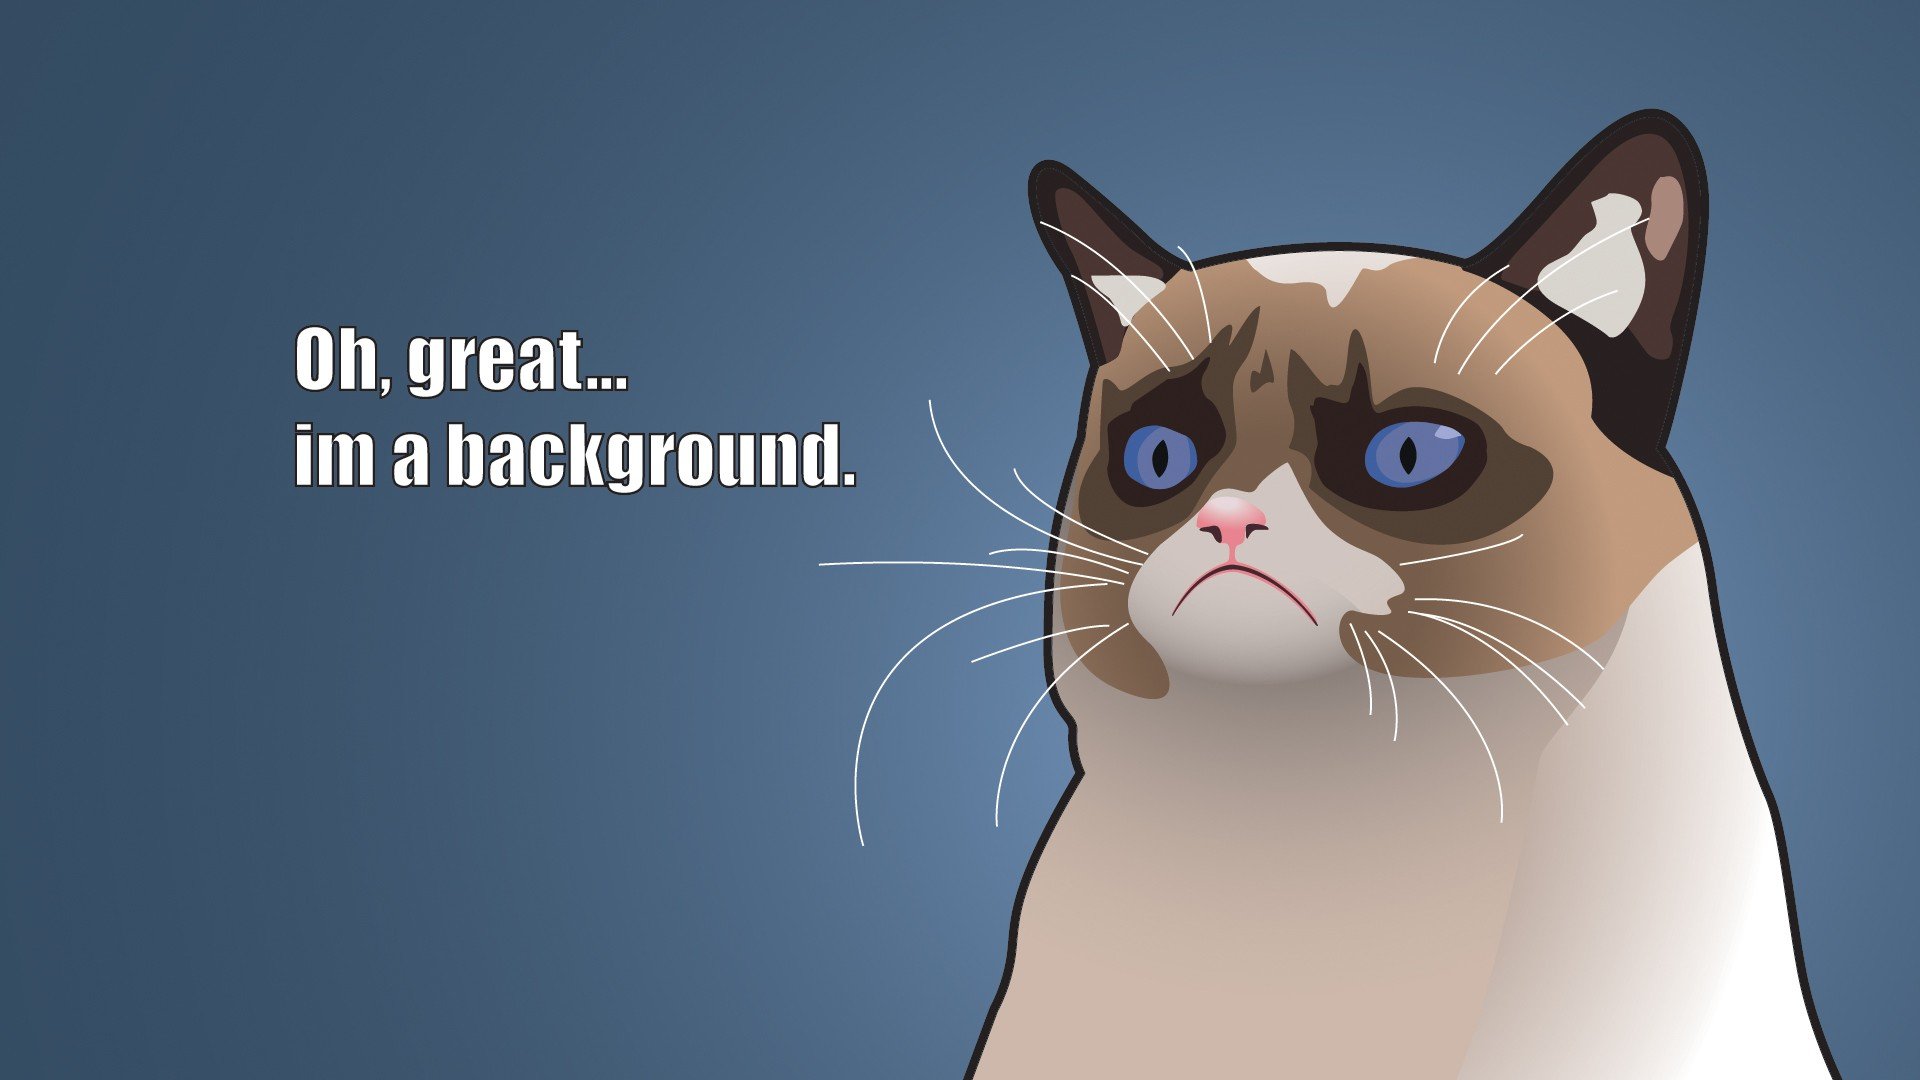 Grumpy Cat Meme Pictures humor funny cats r wallpaper background